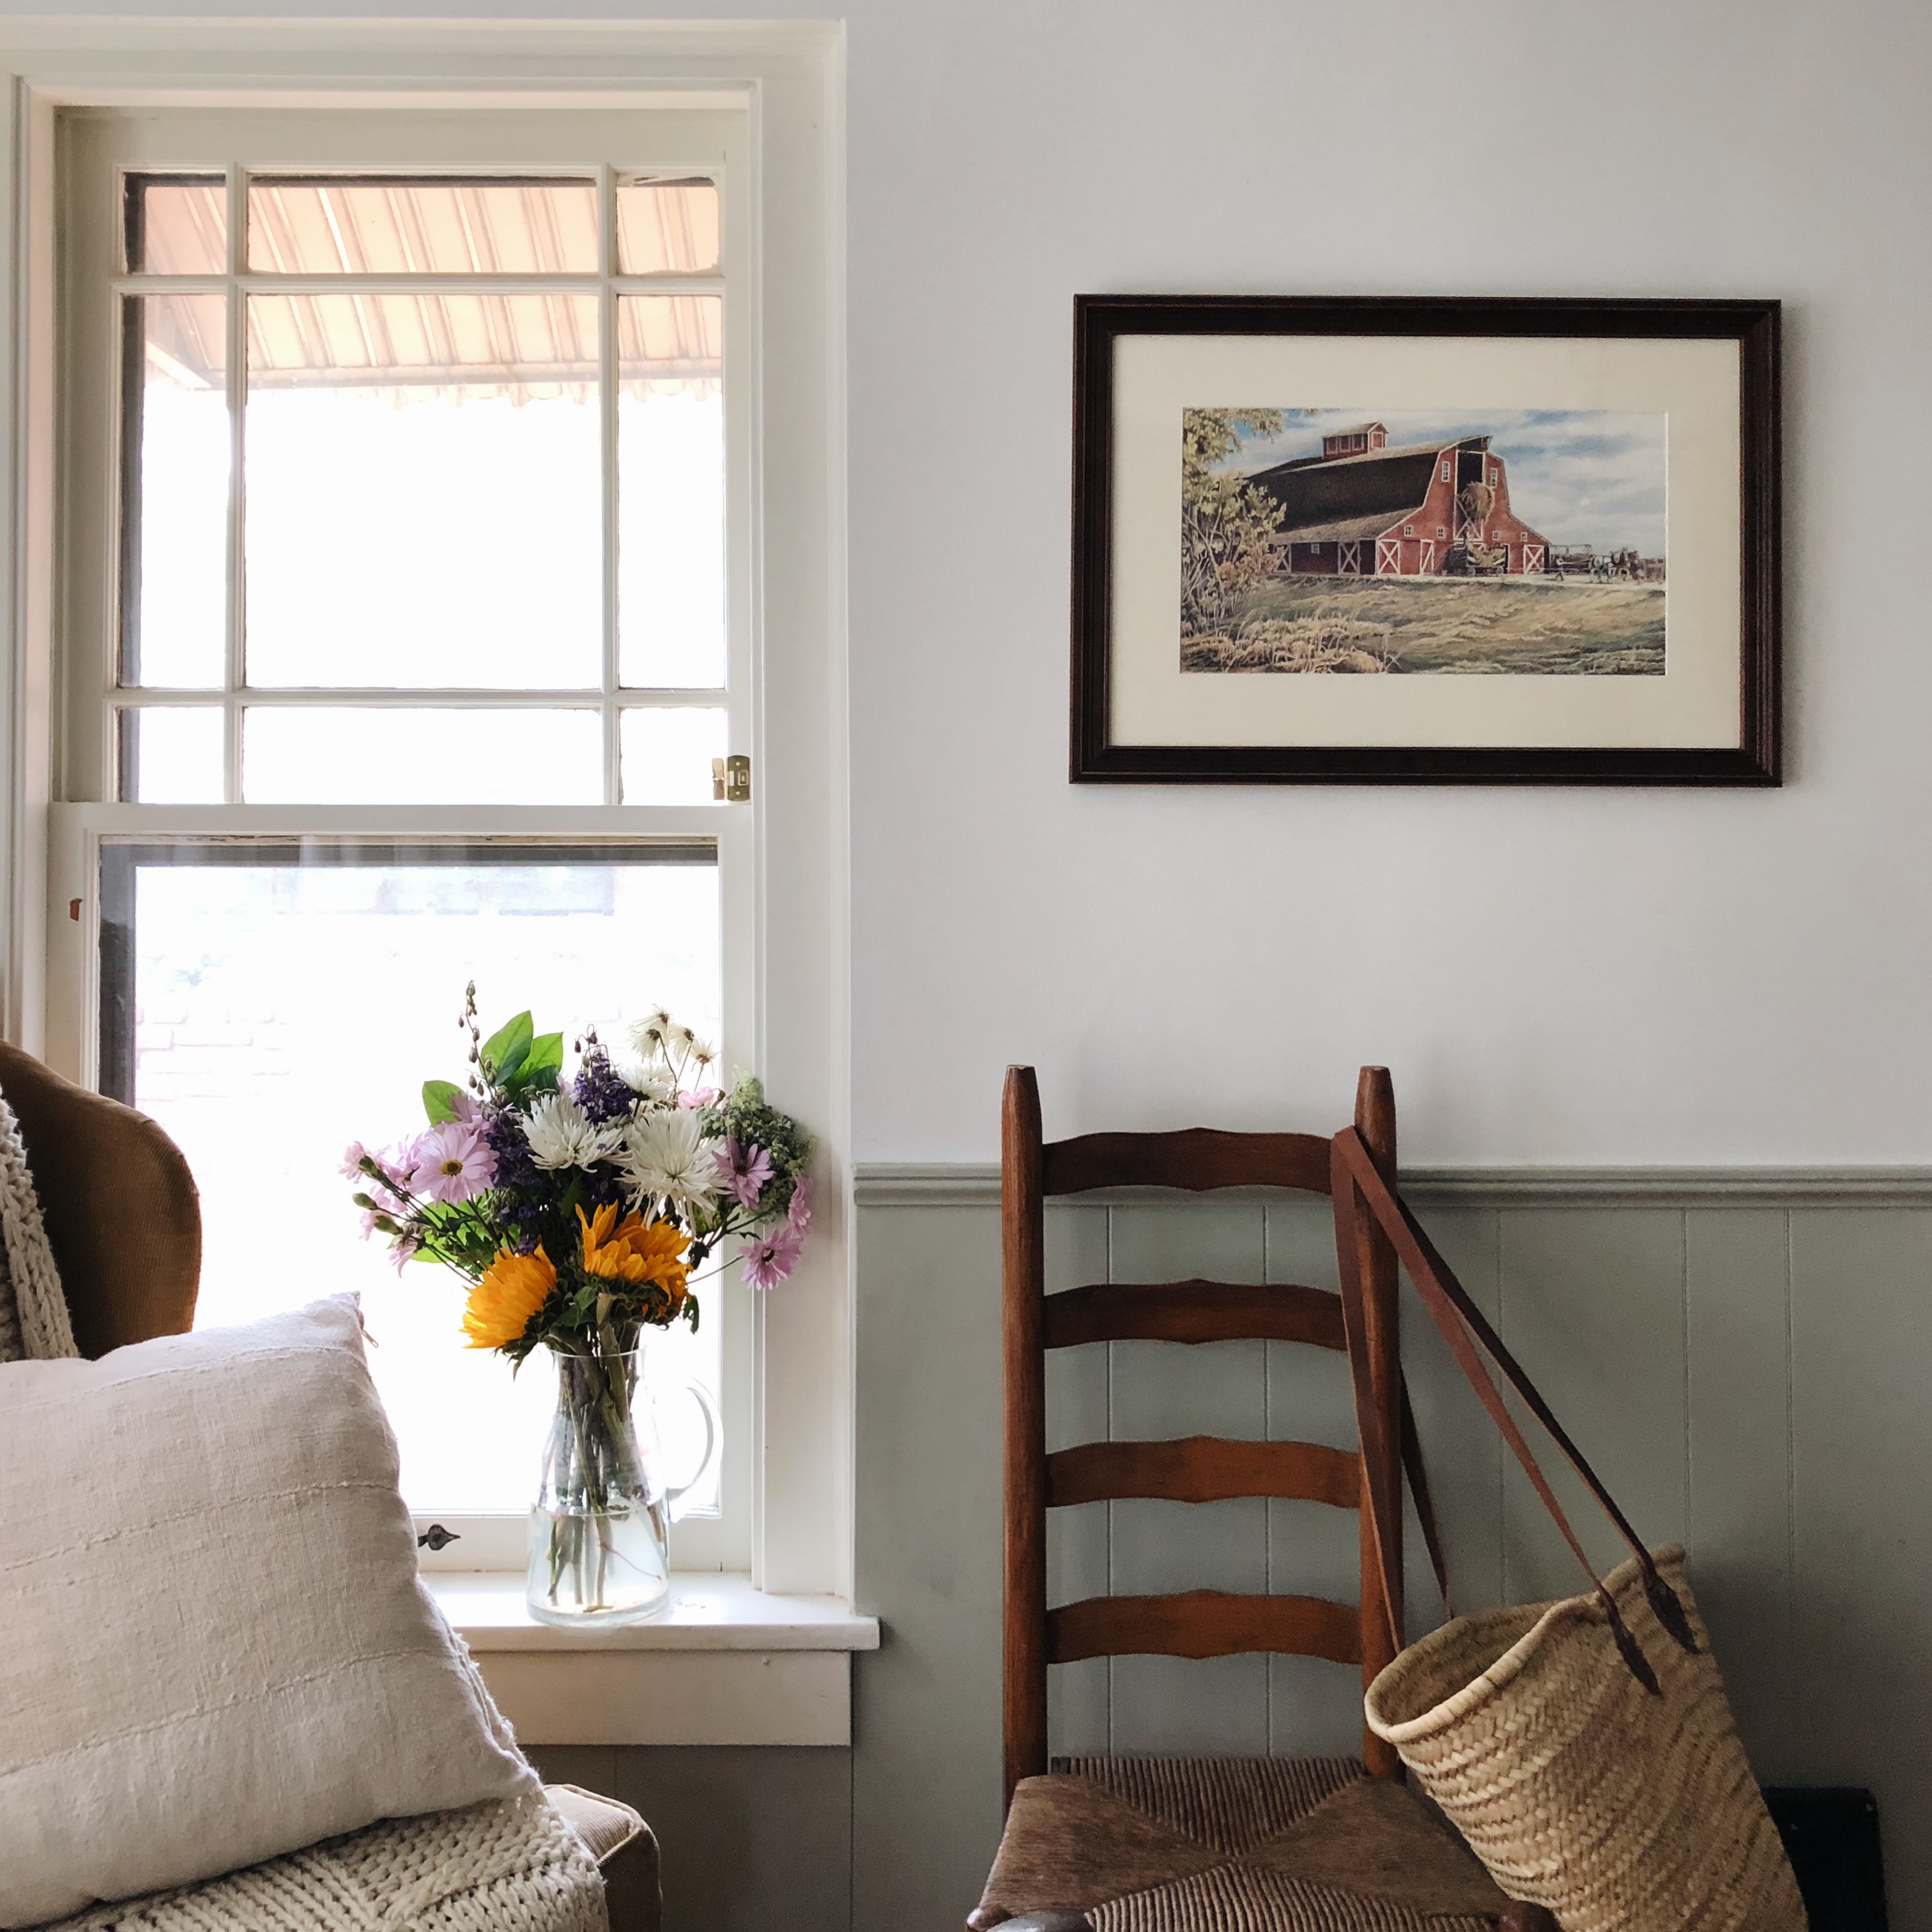 A corner shot of a room with a wicker chair and flowers on the windowsill. A framed drawing of a red barn hangs on the wall in a gold frame.